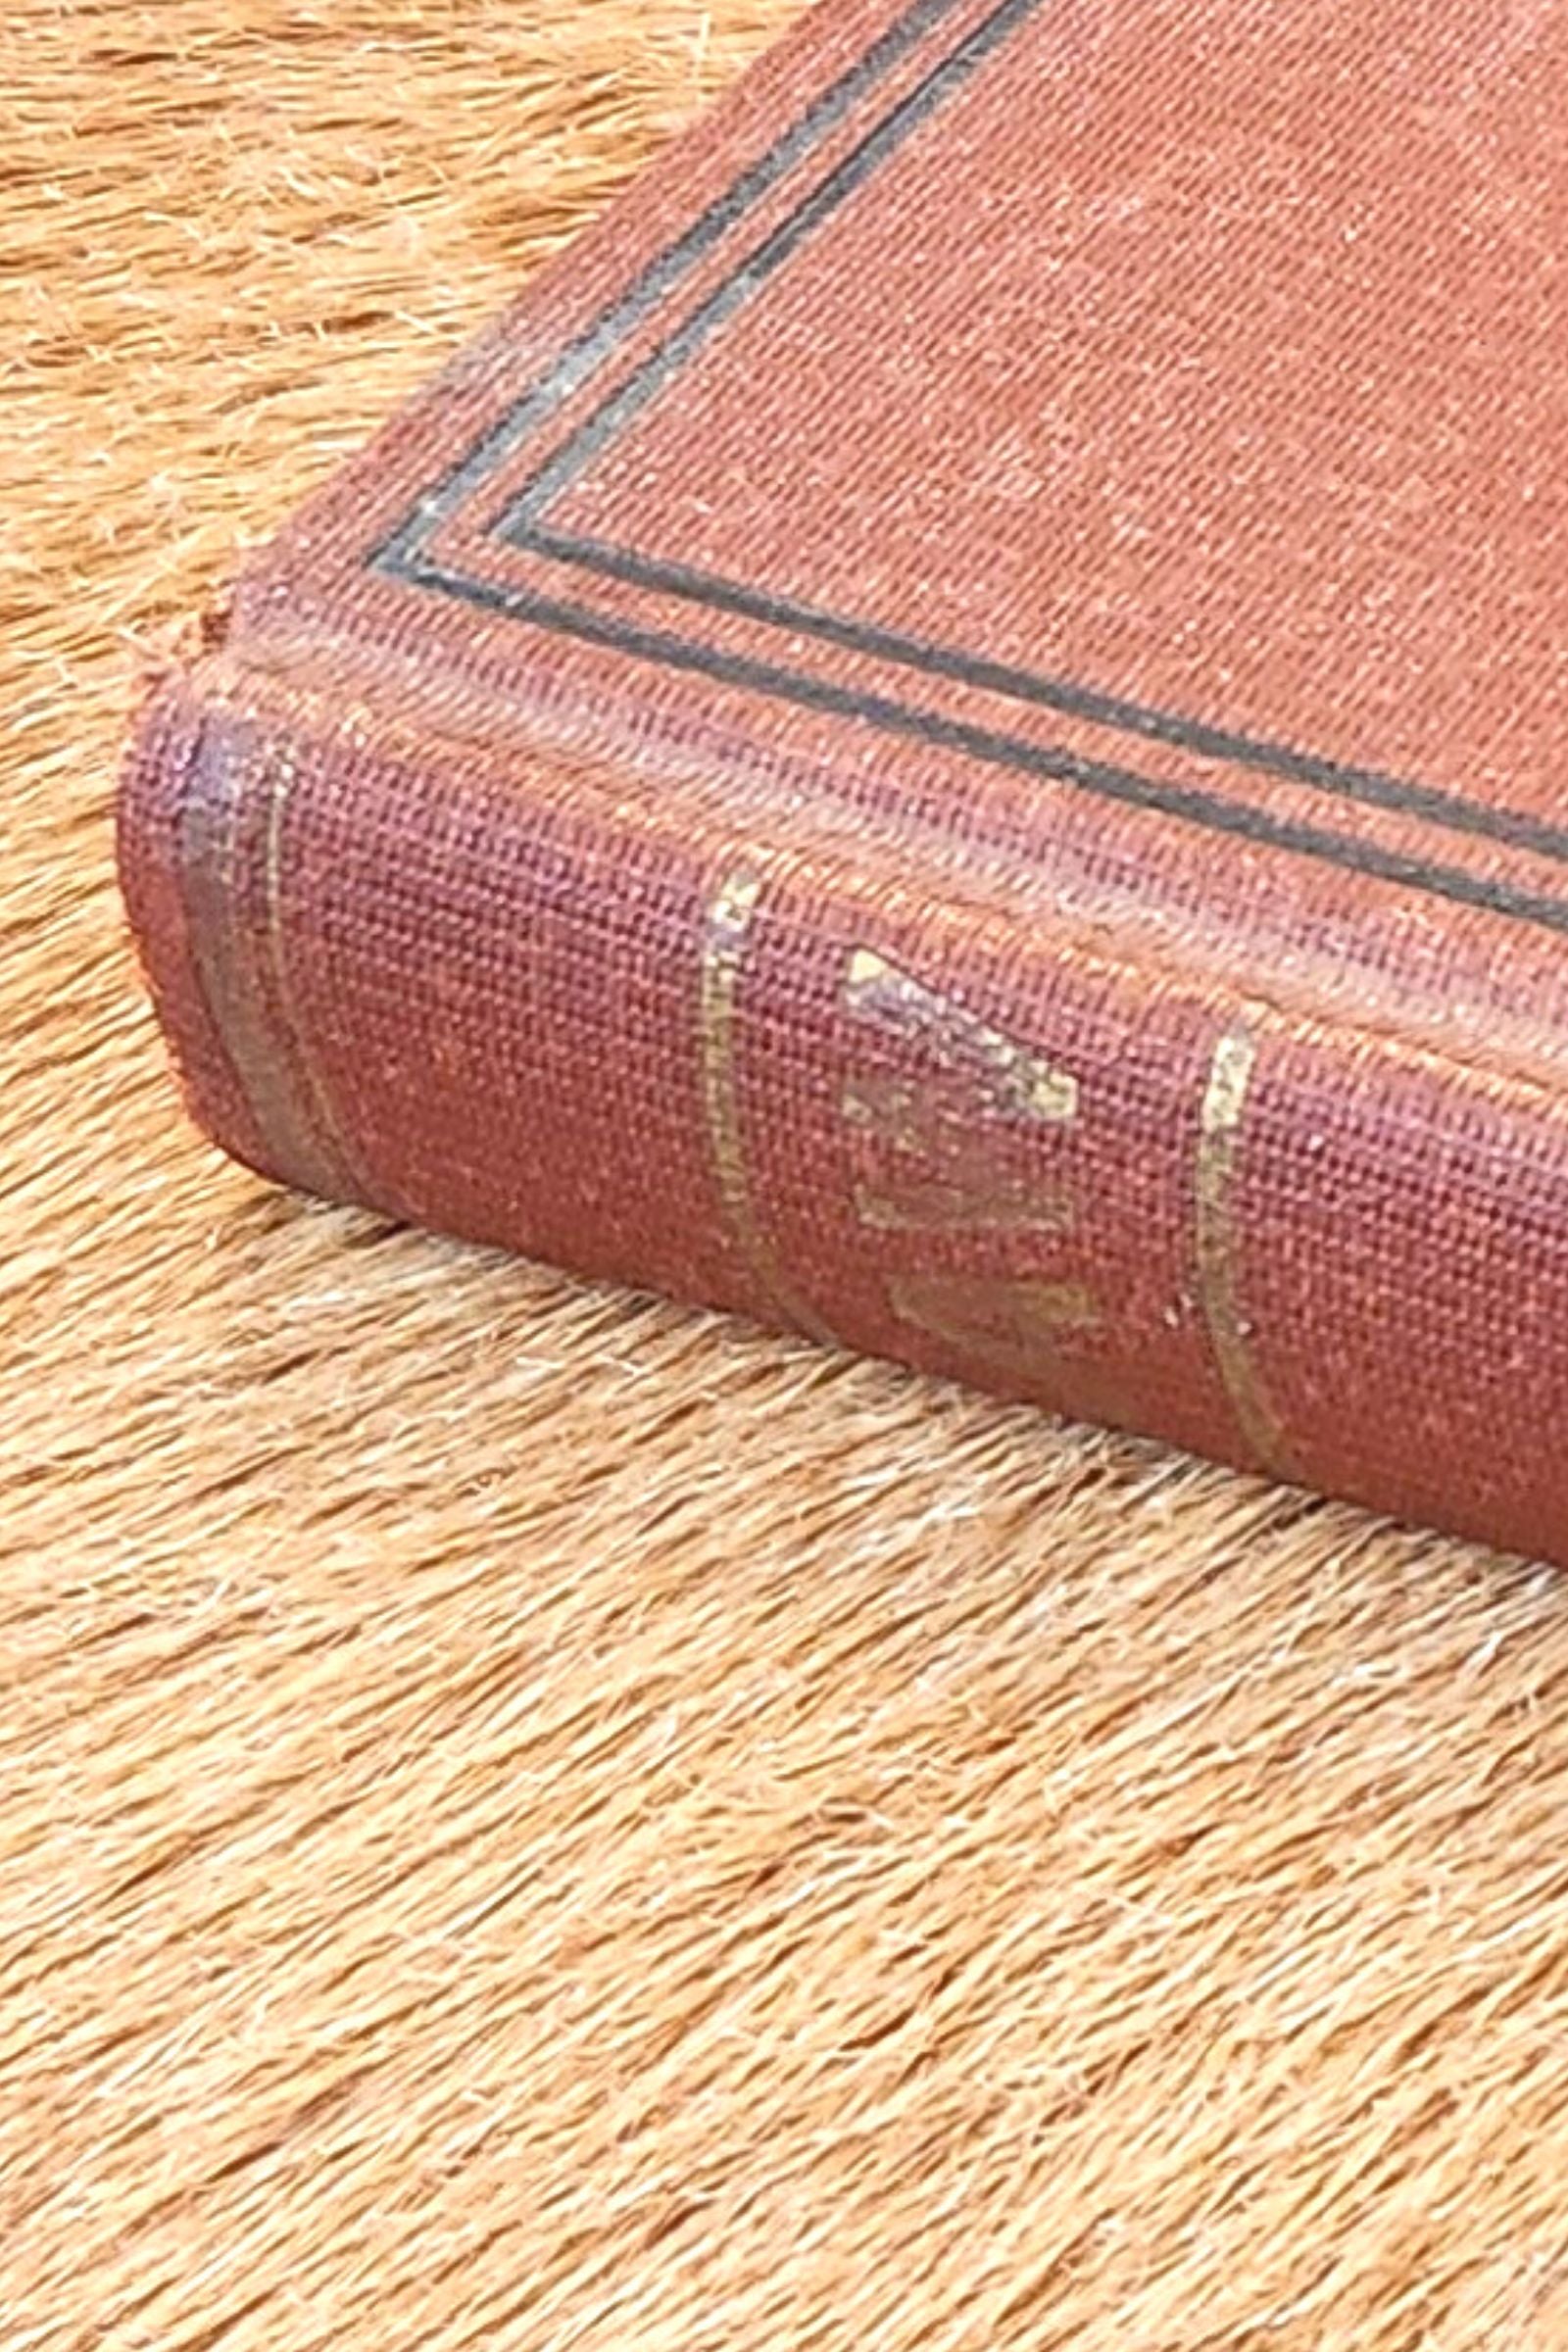 Vintage LAW Book - Law and Business Counselor Book